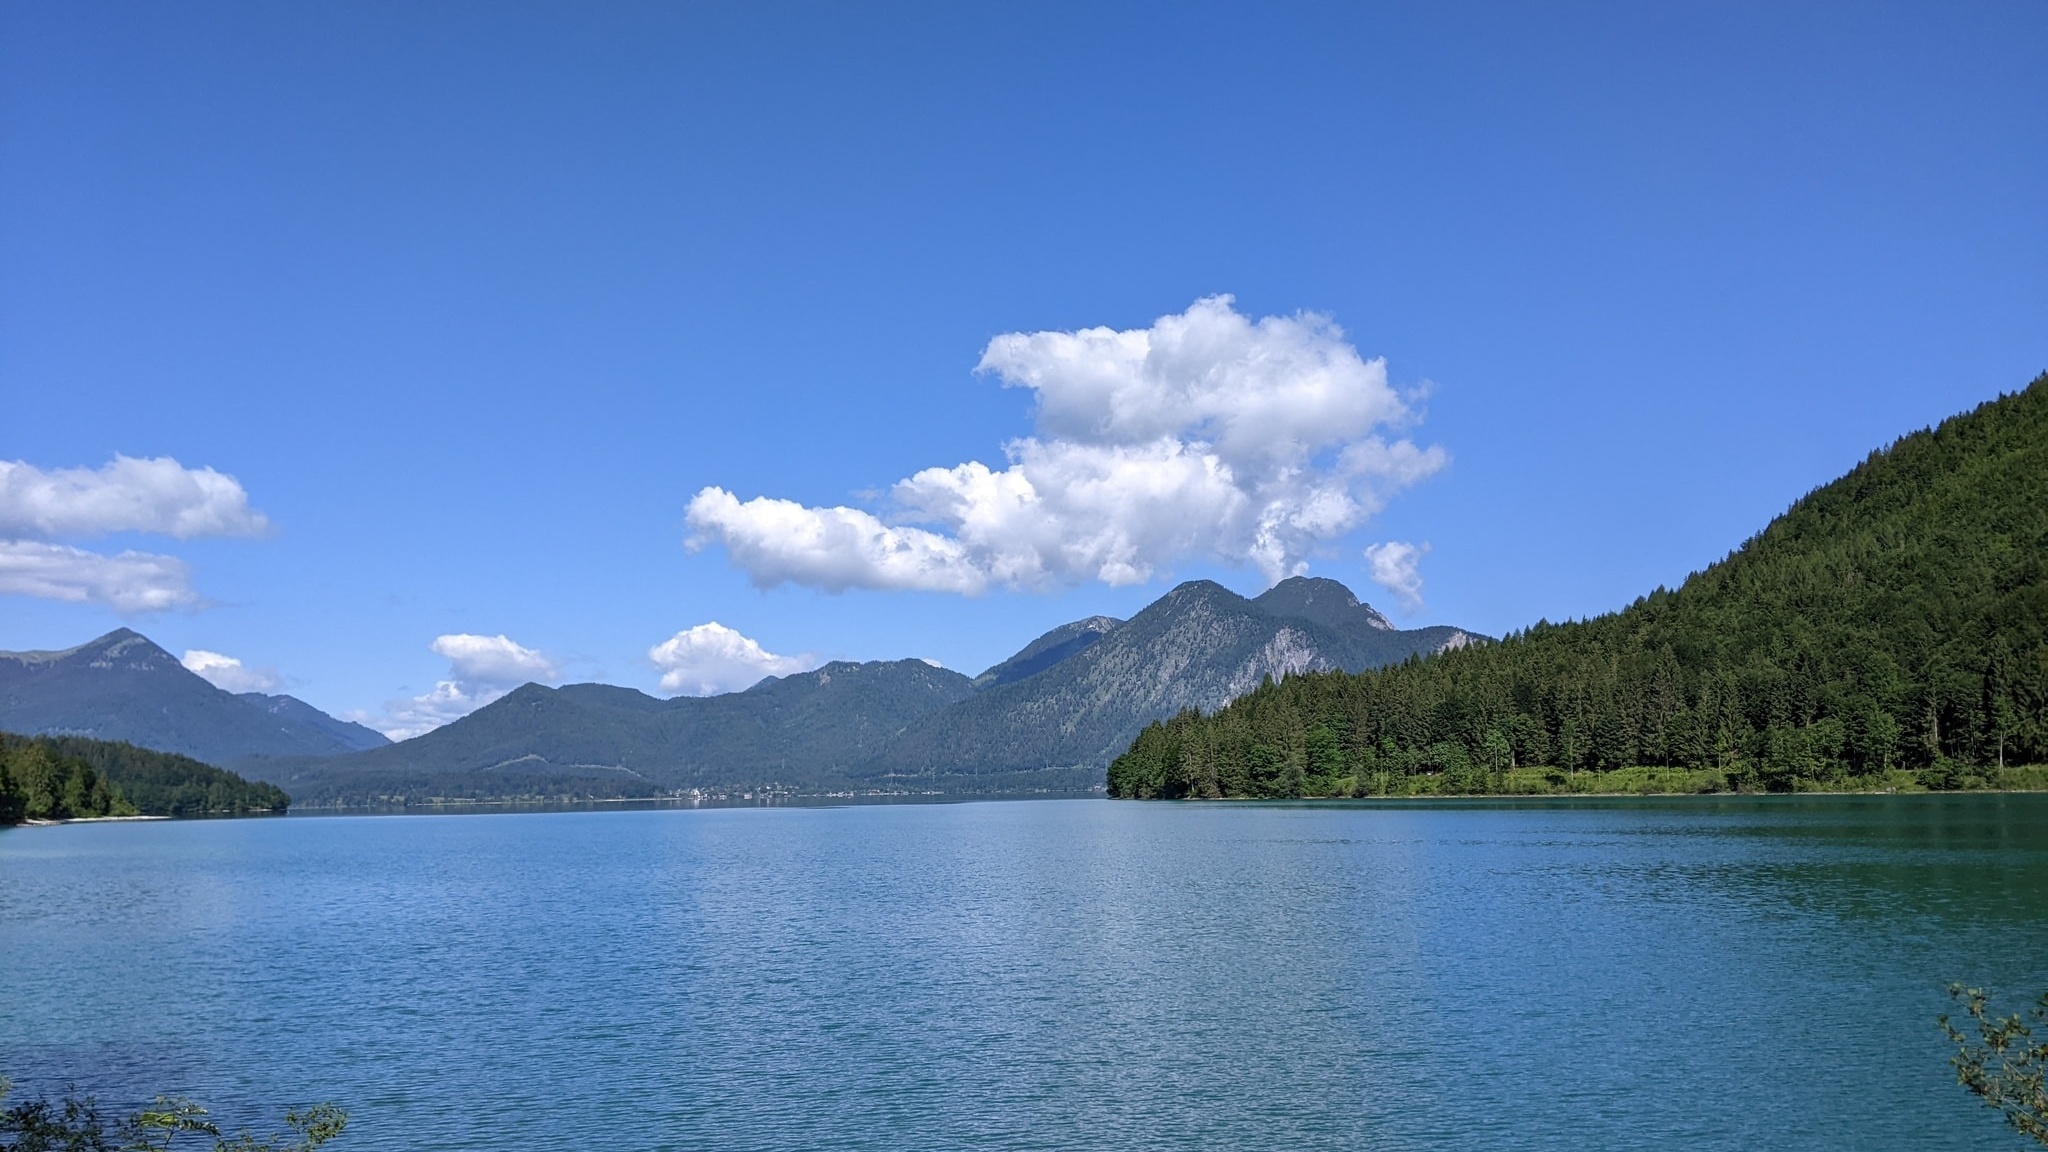 Lake Walchen, one of the deepest and largest alpine lakes in Germany